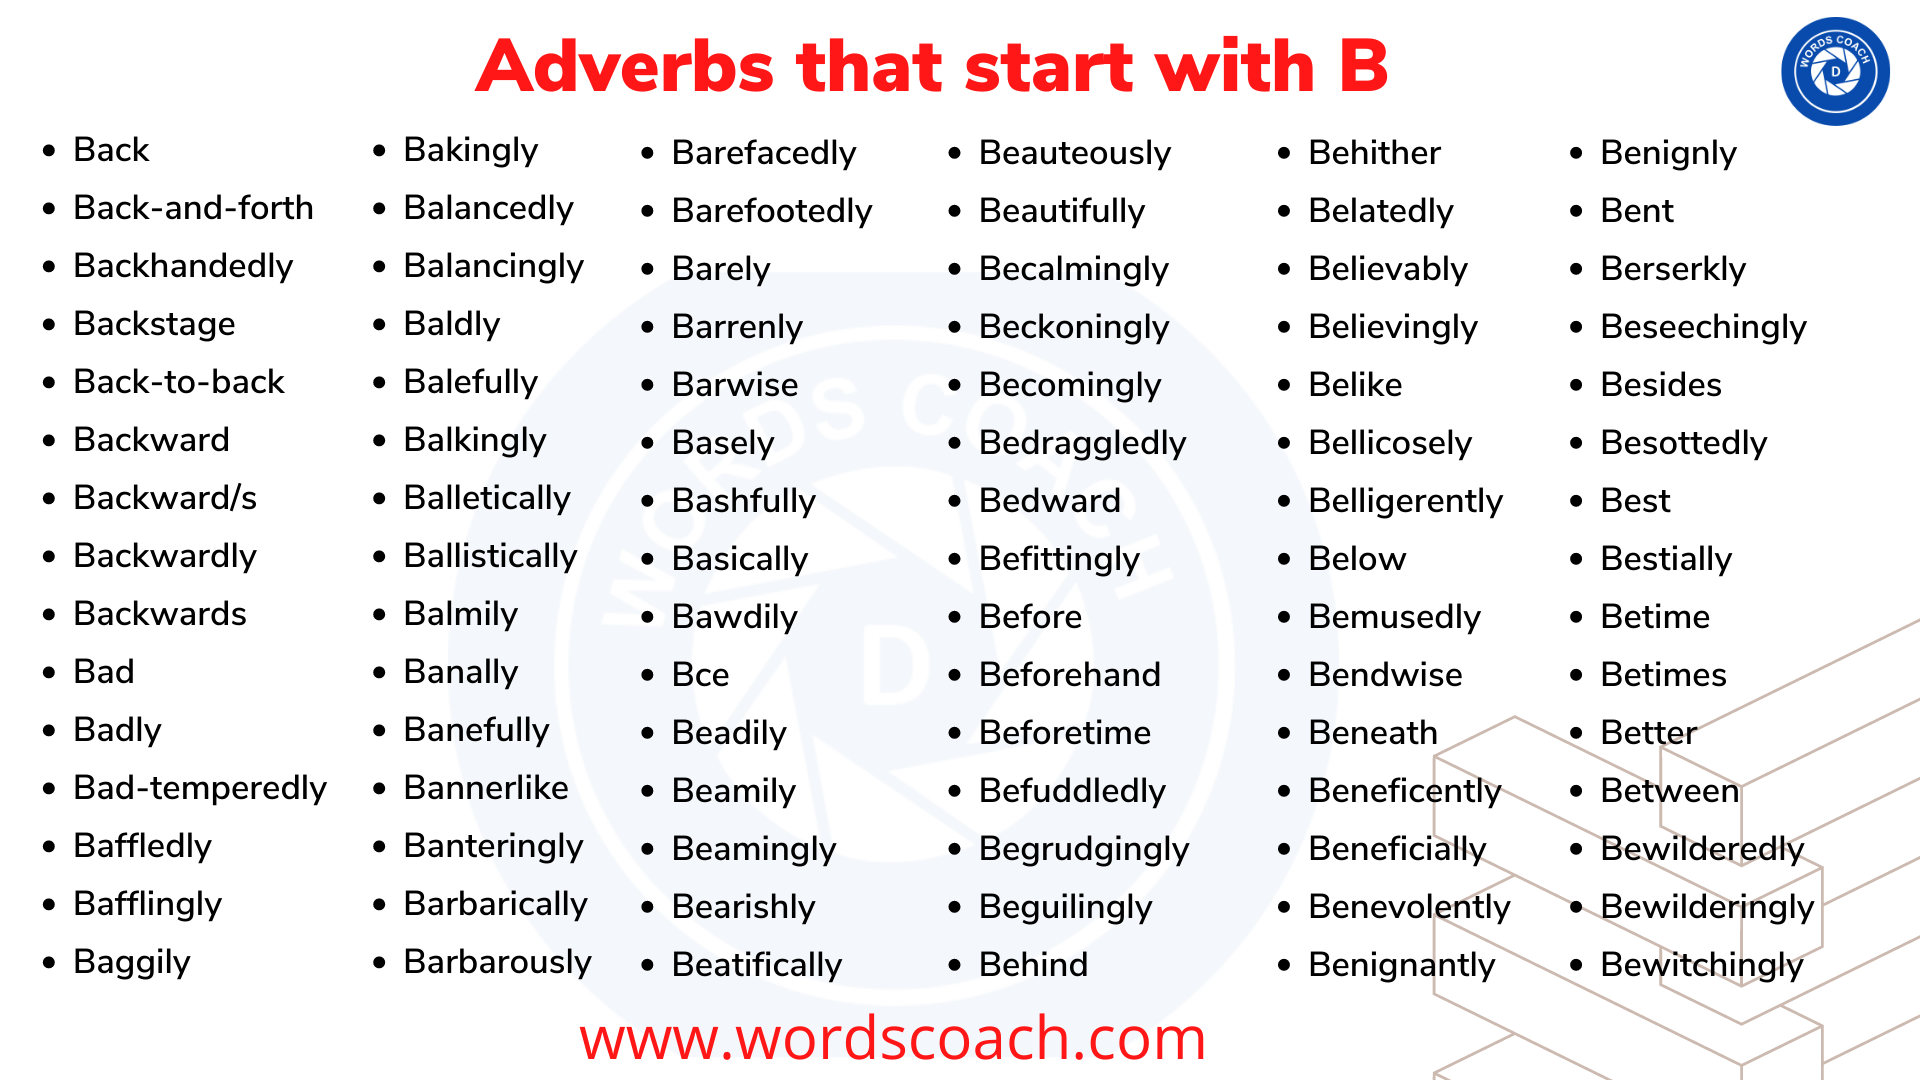 Adverbs that start with B - wordscoach.com